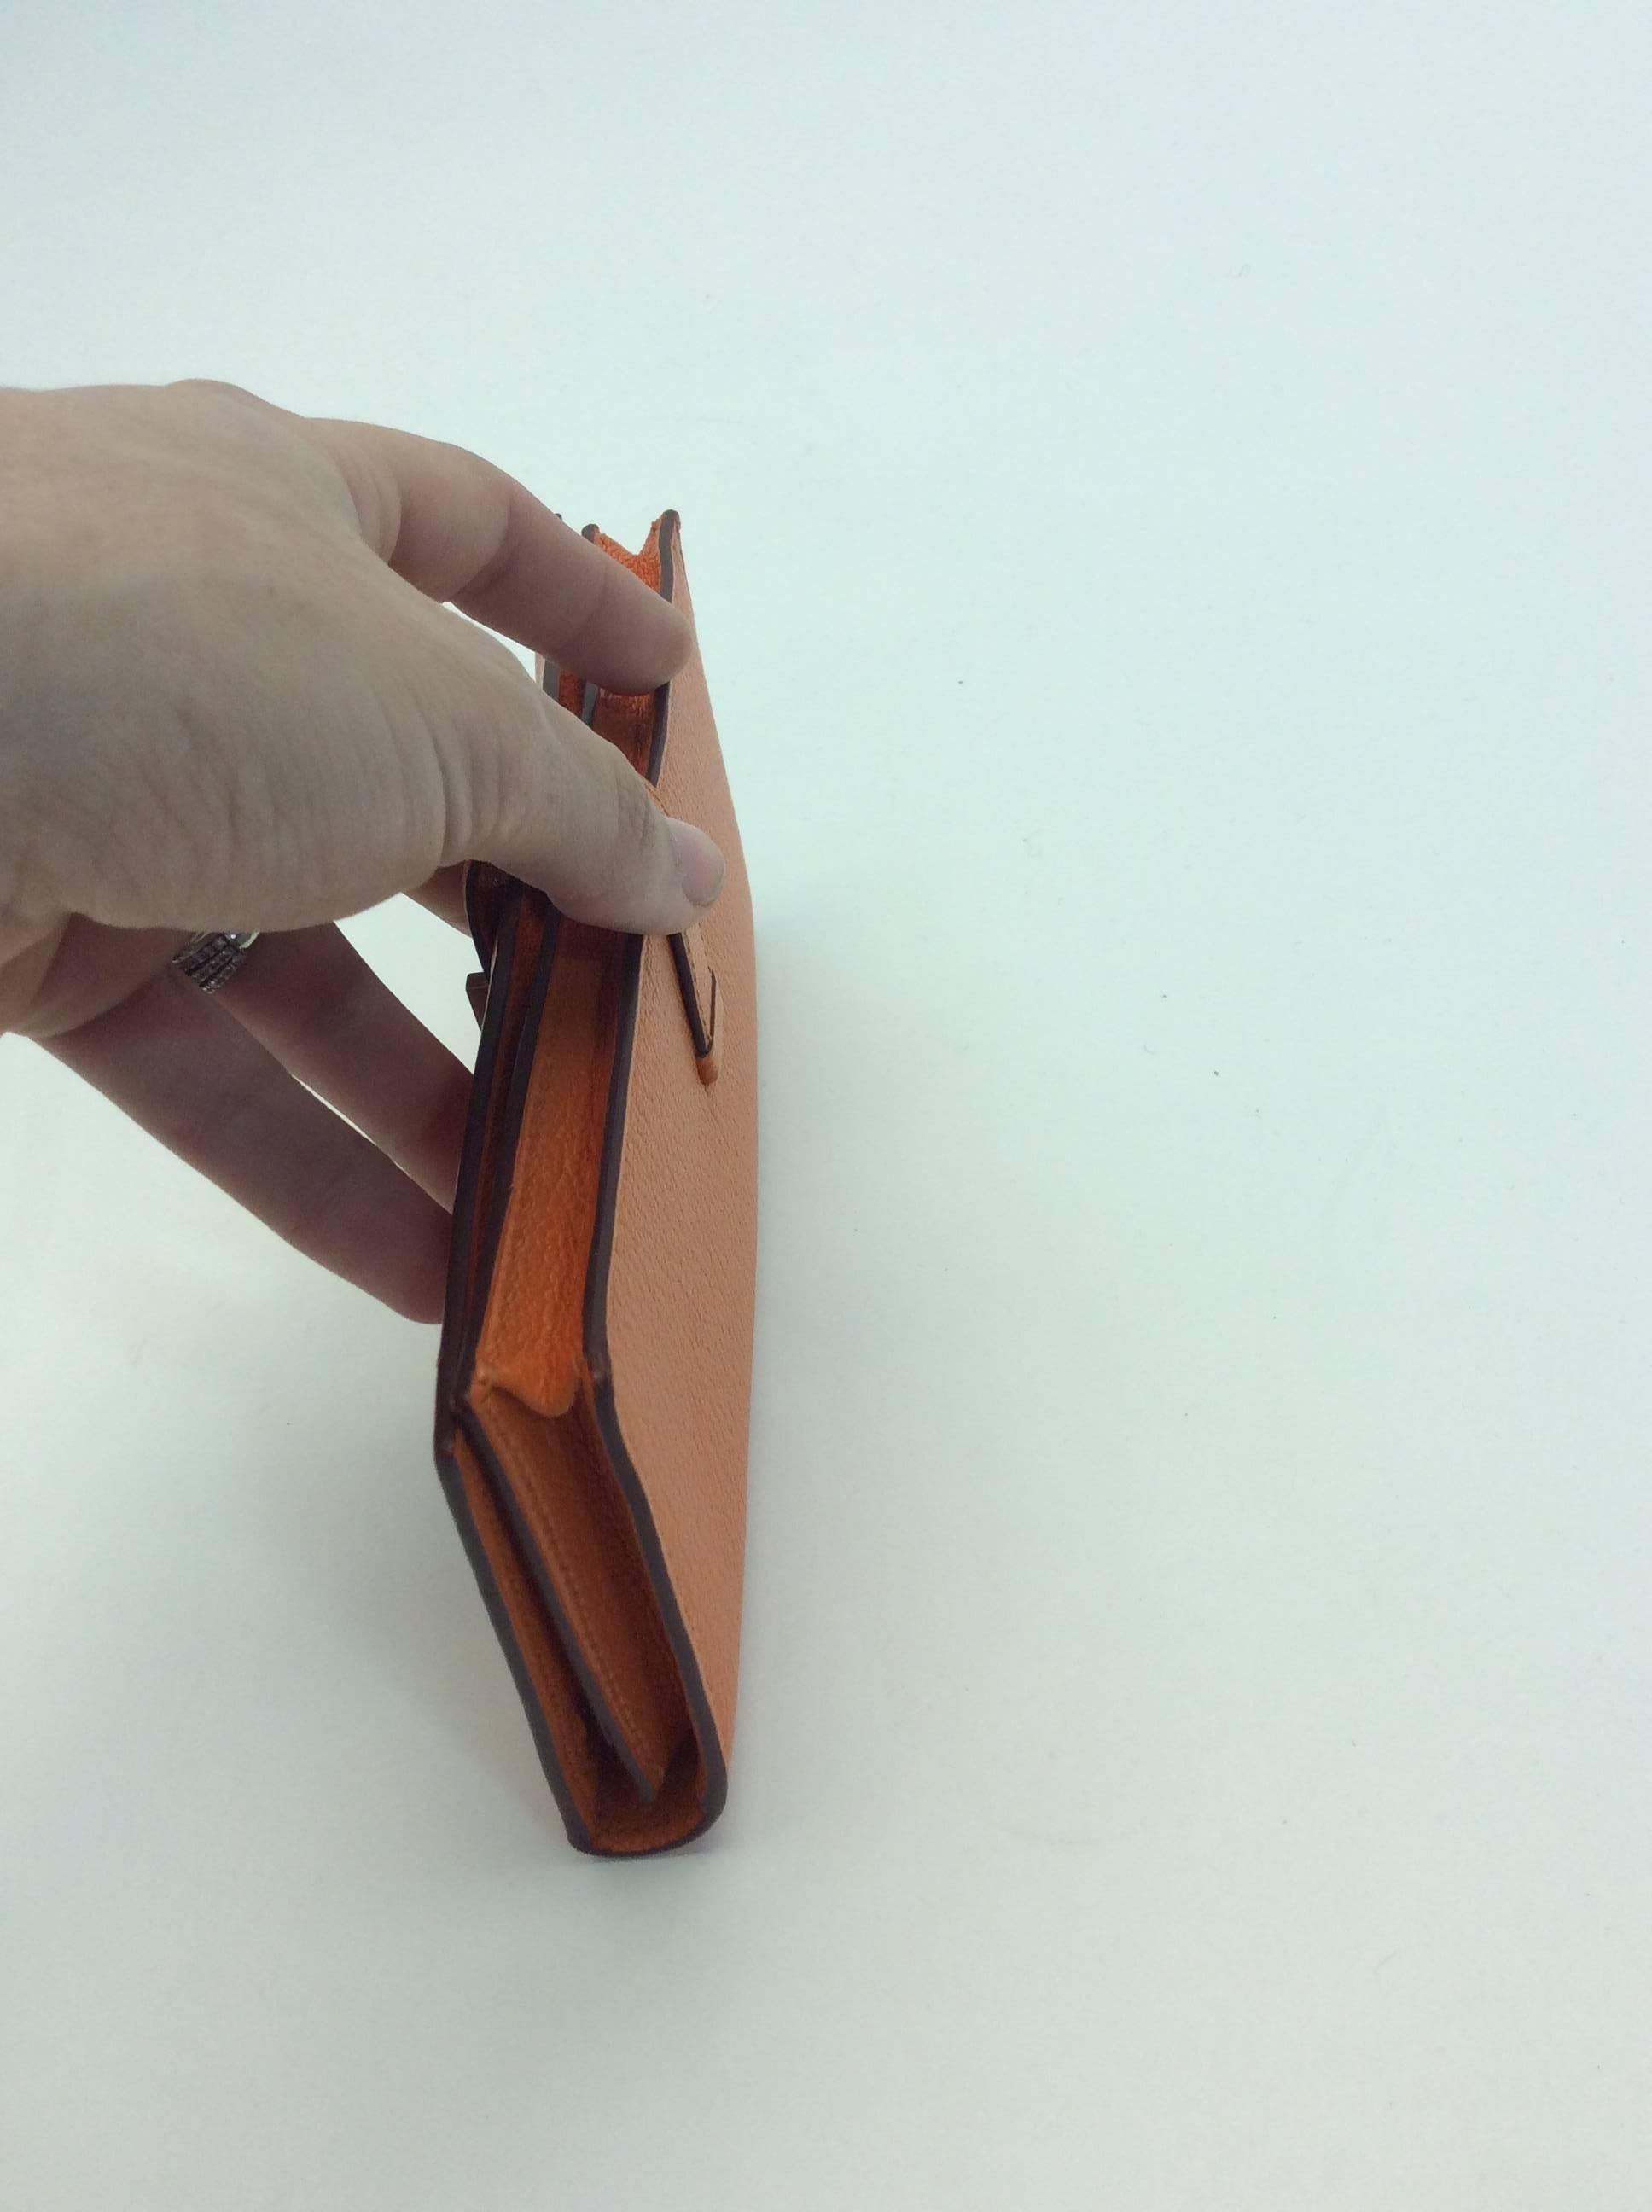 Hermes Orange Bearn Bifold Wallet In Excellent Condition For Sale In Narberth, PA